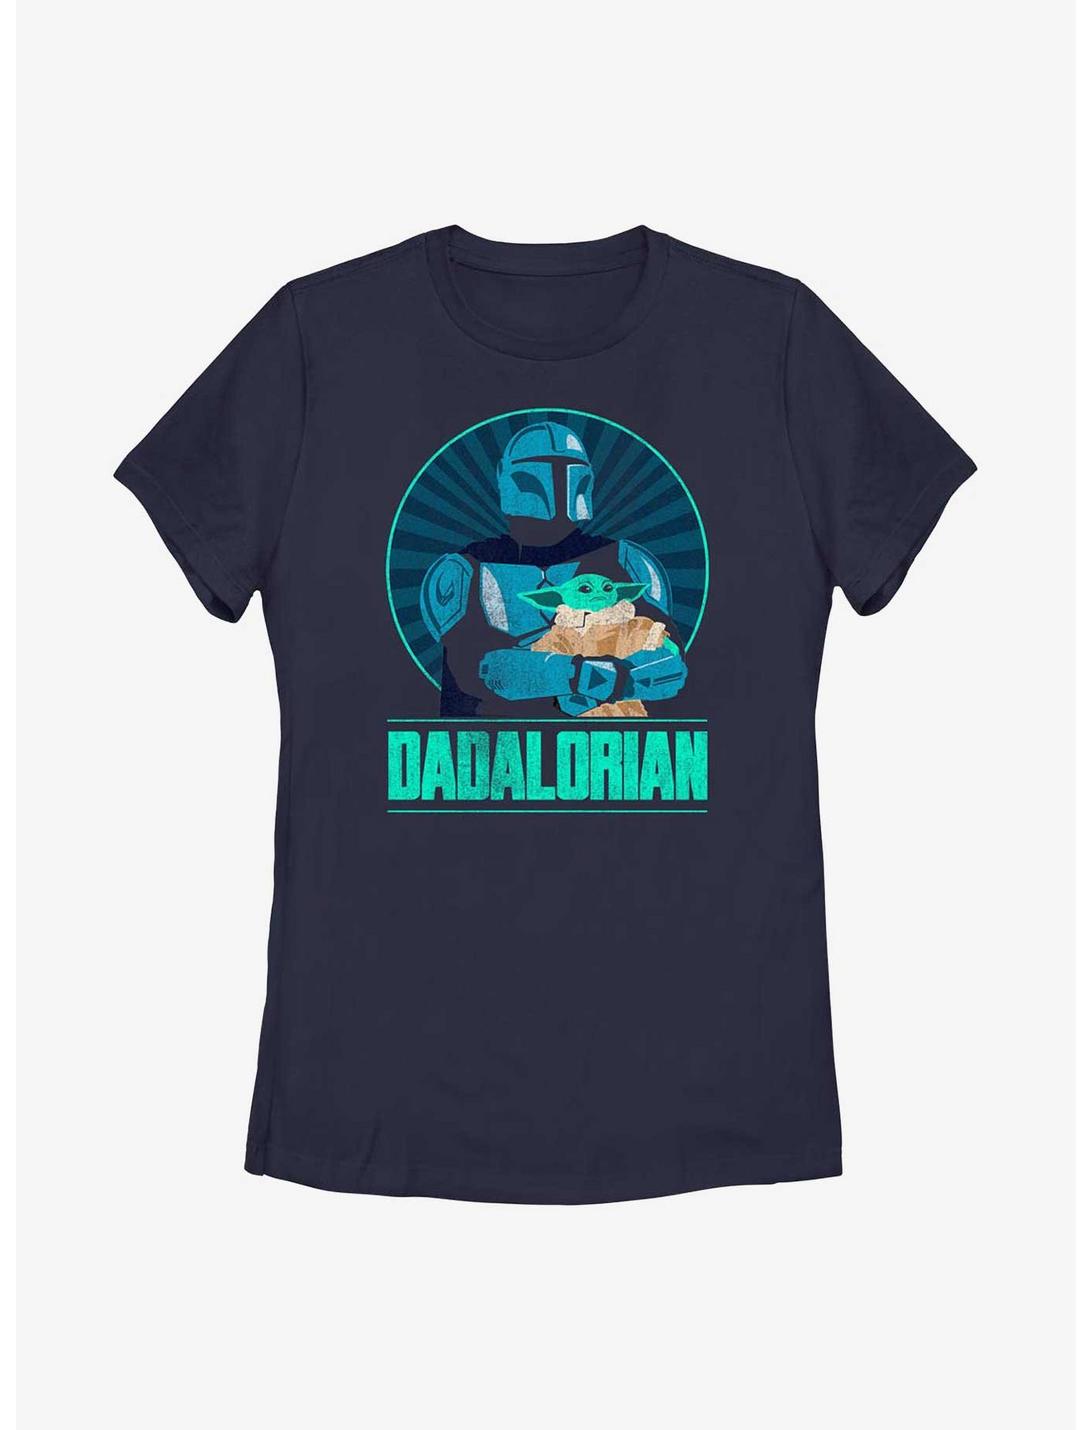 Star Wars The Mandalorian Dadalorian Father and Son Portrait Womens T-Shirt, NAVY, hi-res